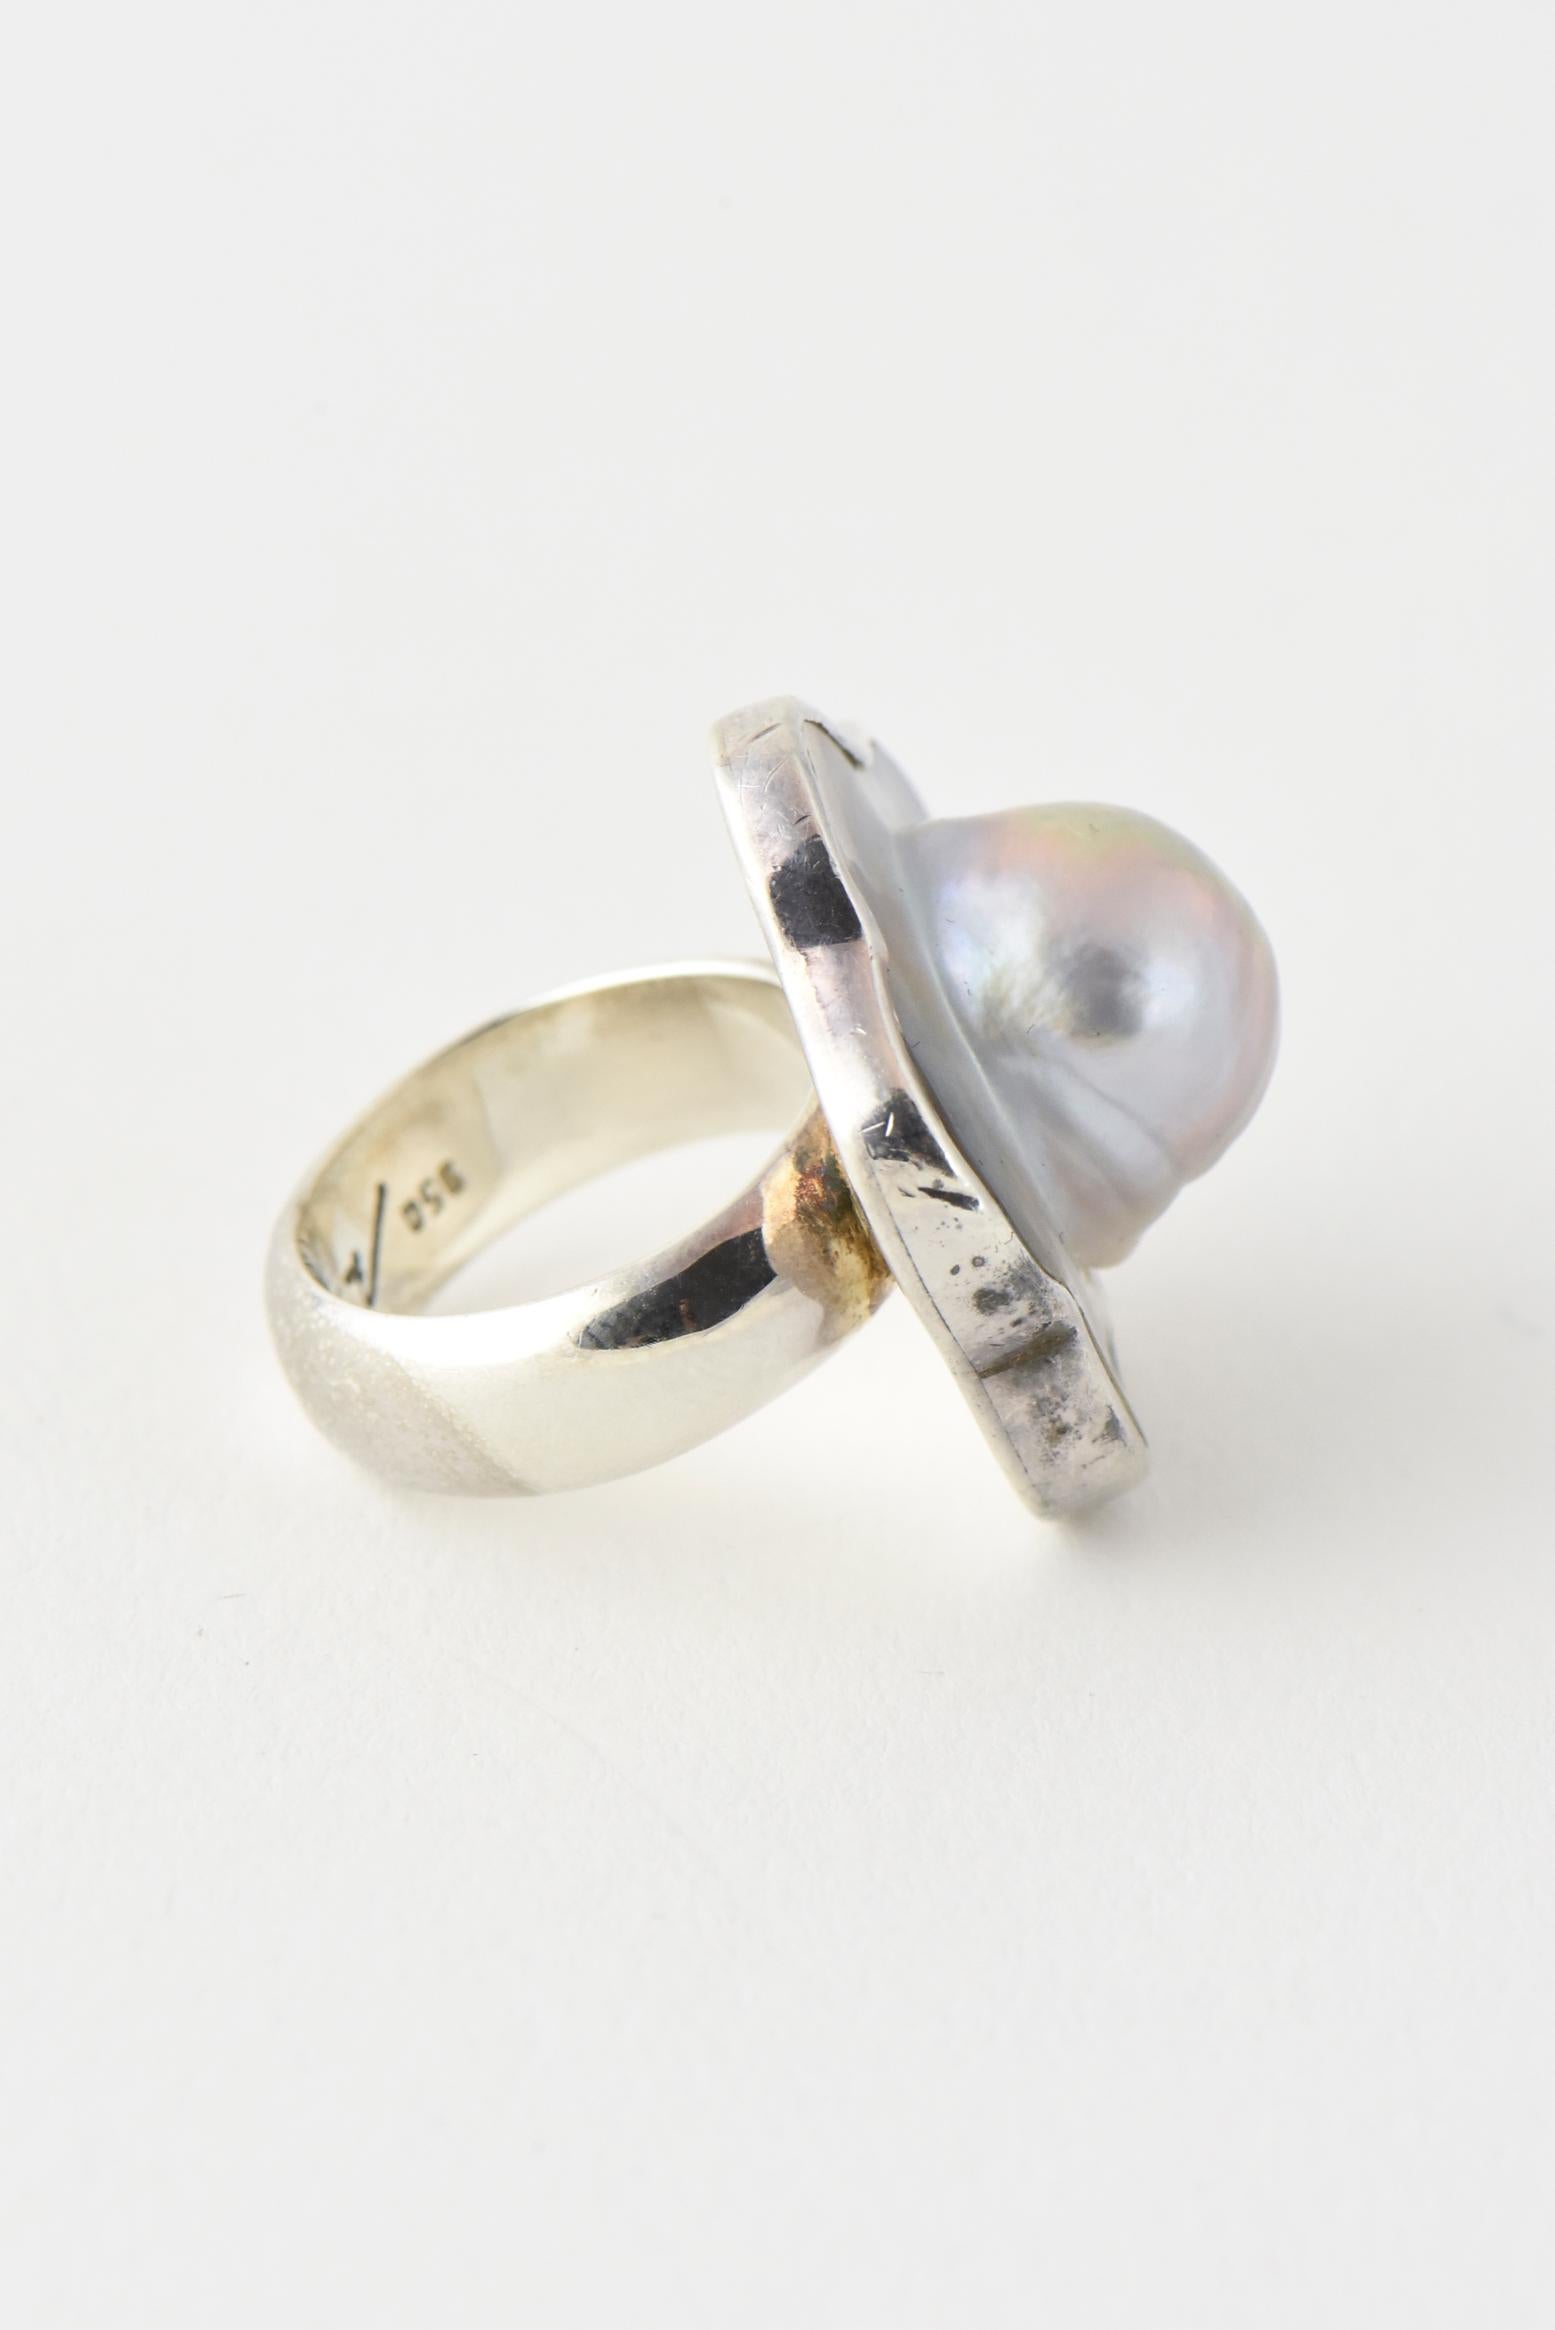 Barry Brinker Blister Pearl Flower Sterling Silver Ring In Fair Condition For Sale In Miami Beach, FL